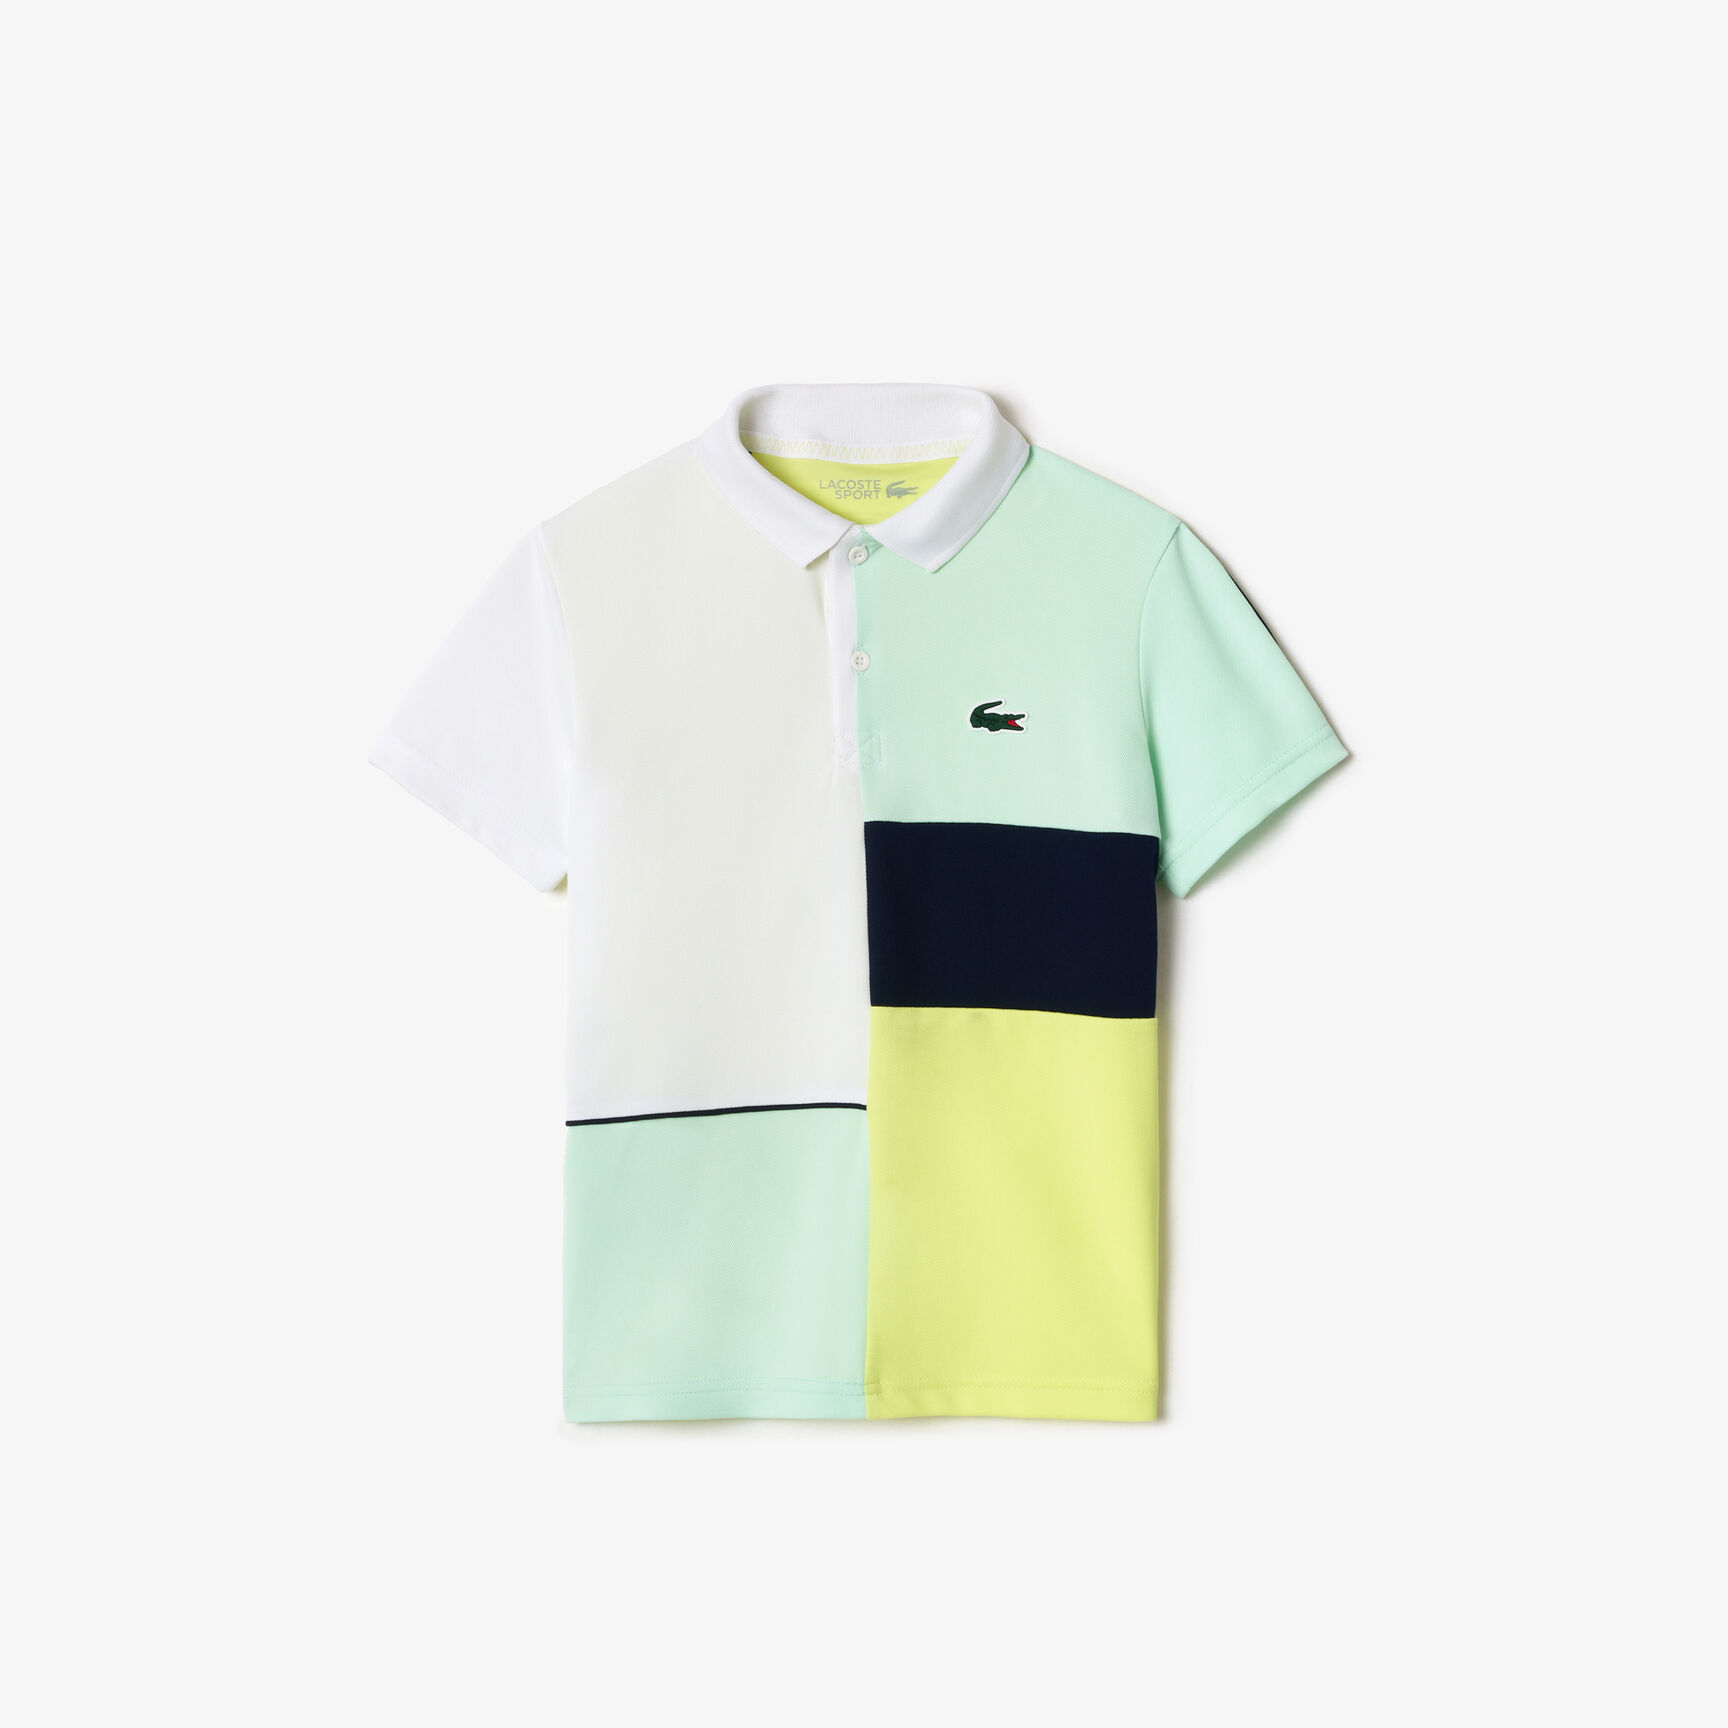 Buy Recycled Pique Knit Tennis Polo Shirt | Lacoste UAE